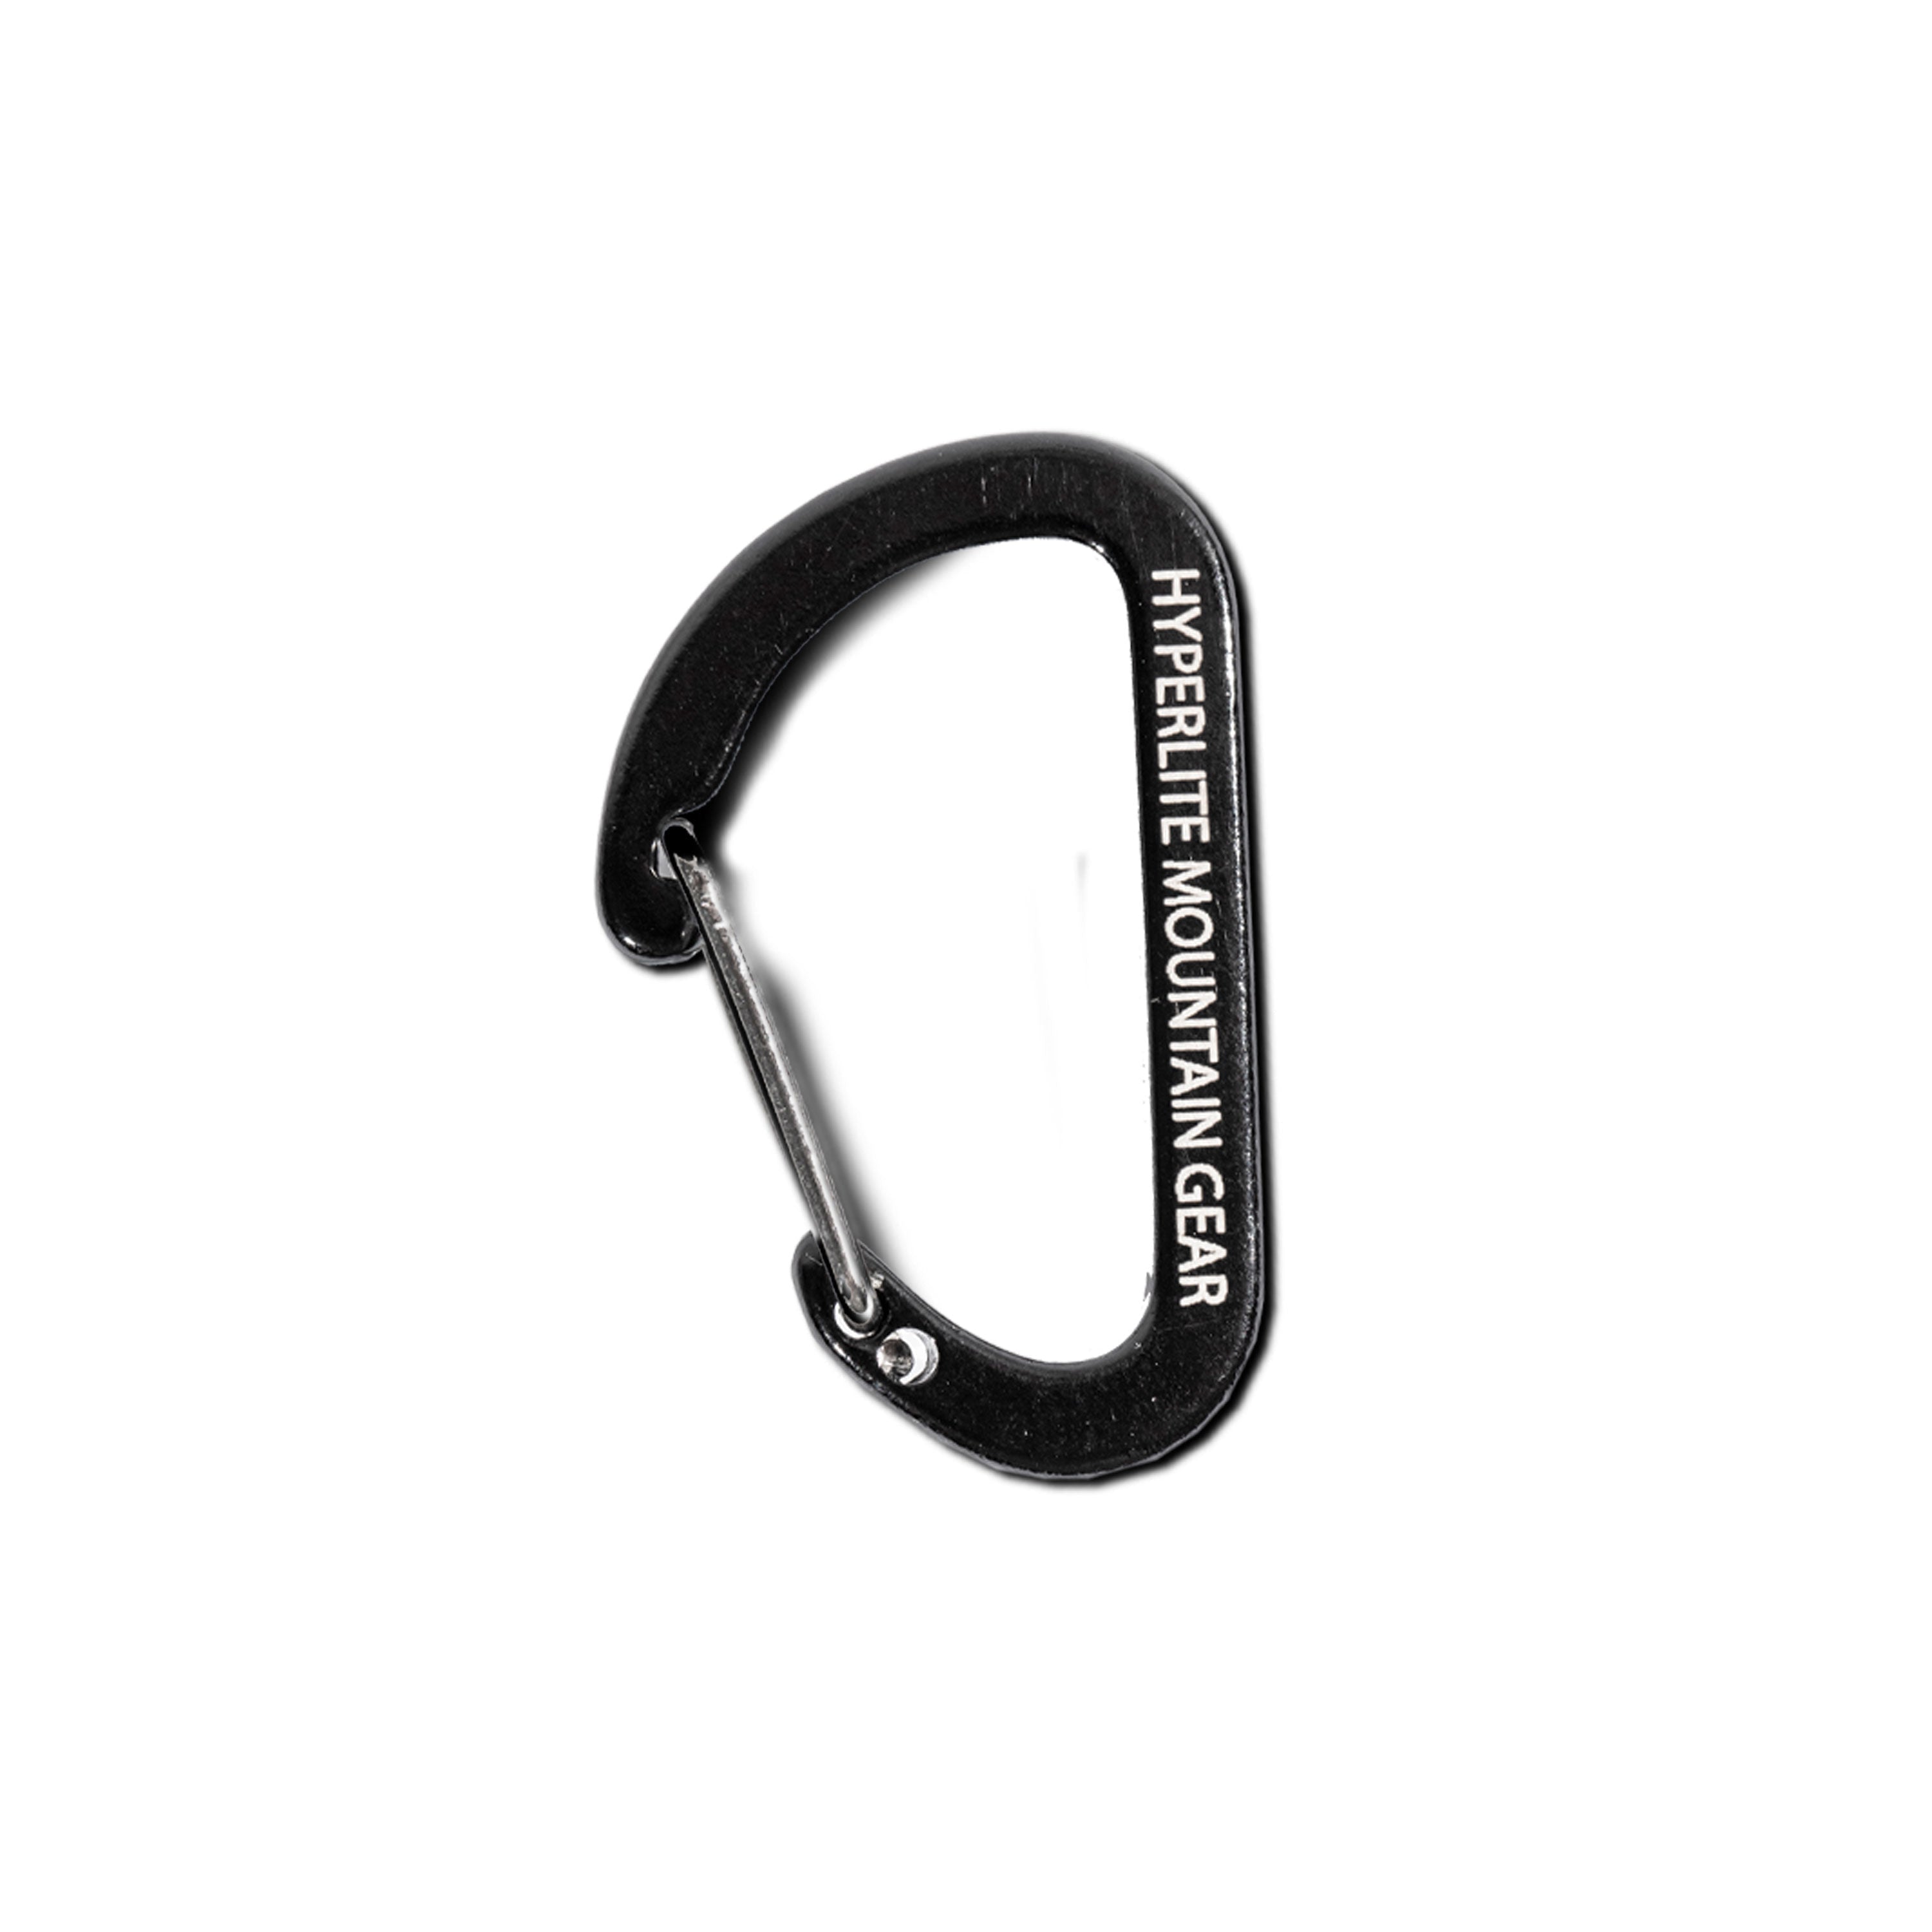 Micro Carabiners (4pk) 1.6 Strong Wire Gate Closure Ultralight